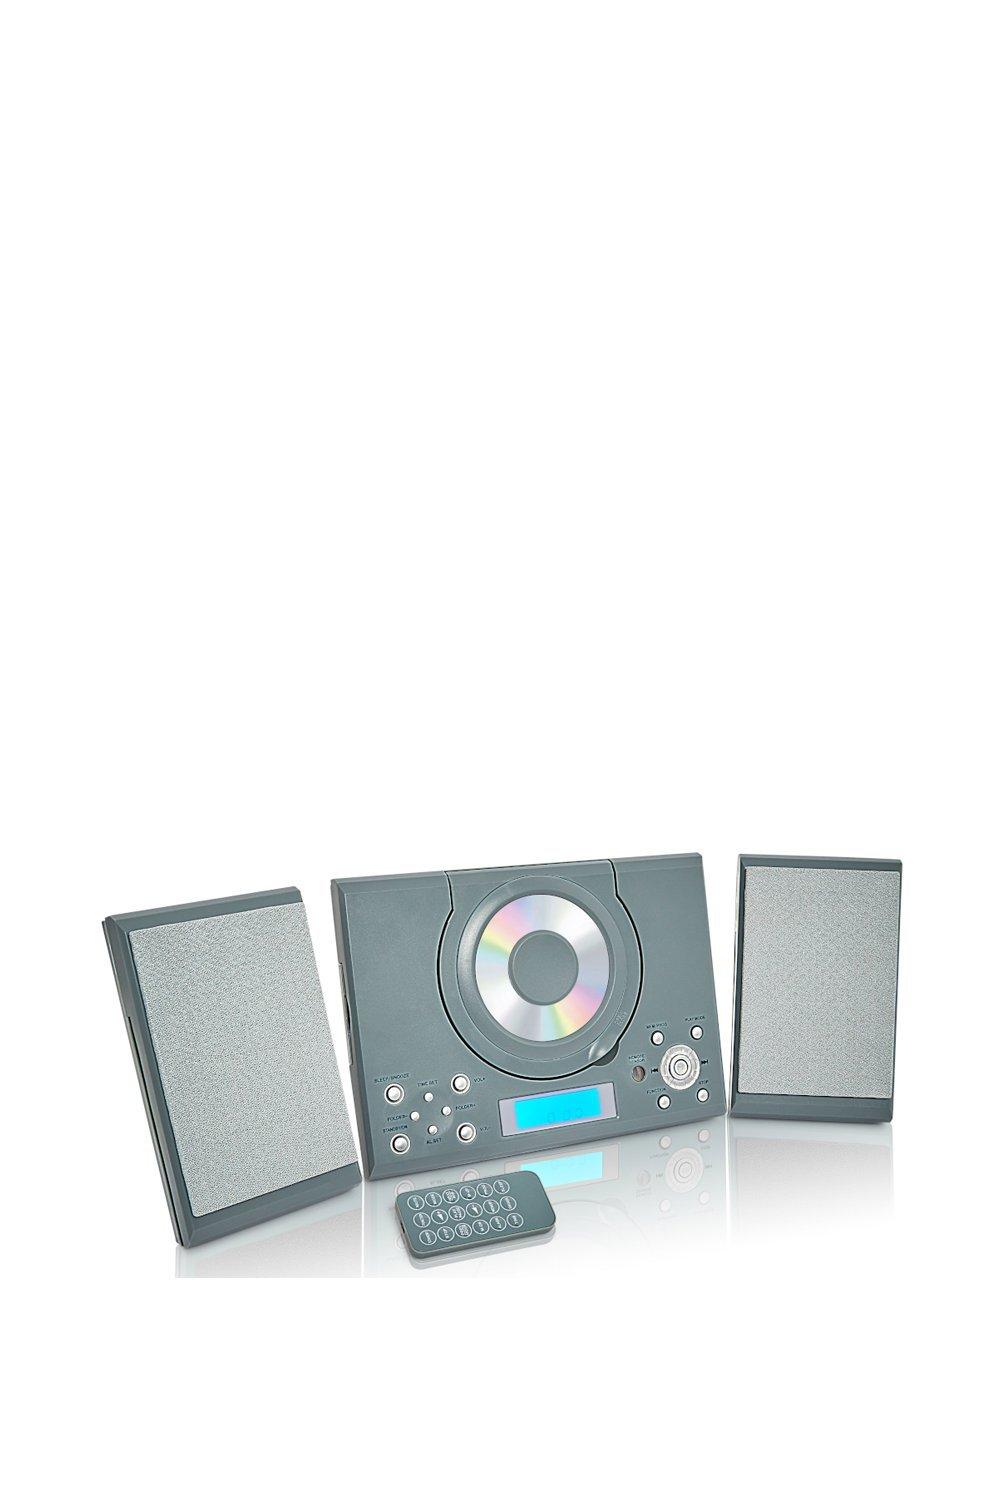 Grouptronics HIFI with CD Player  Radio & AUX IN Socket For Connecting  Phone MP3 Player Tablet or IPod|grey